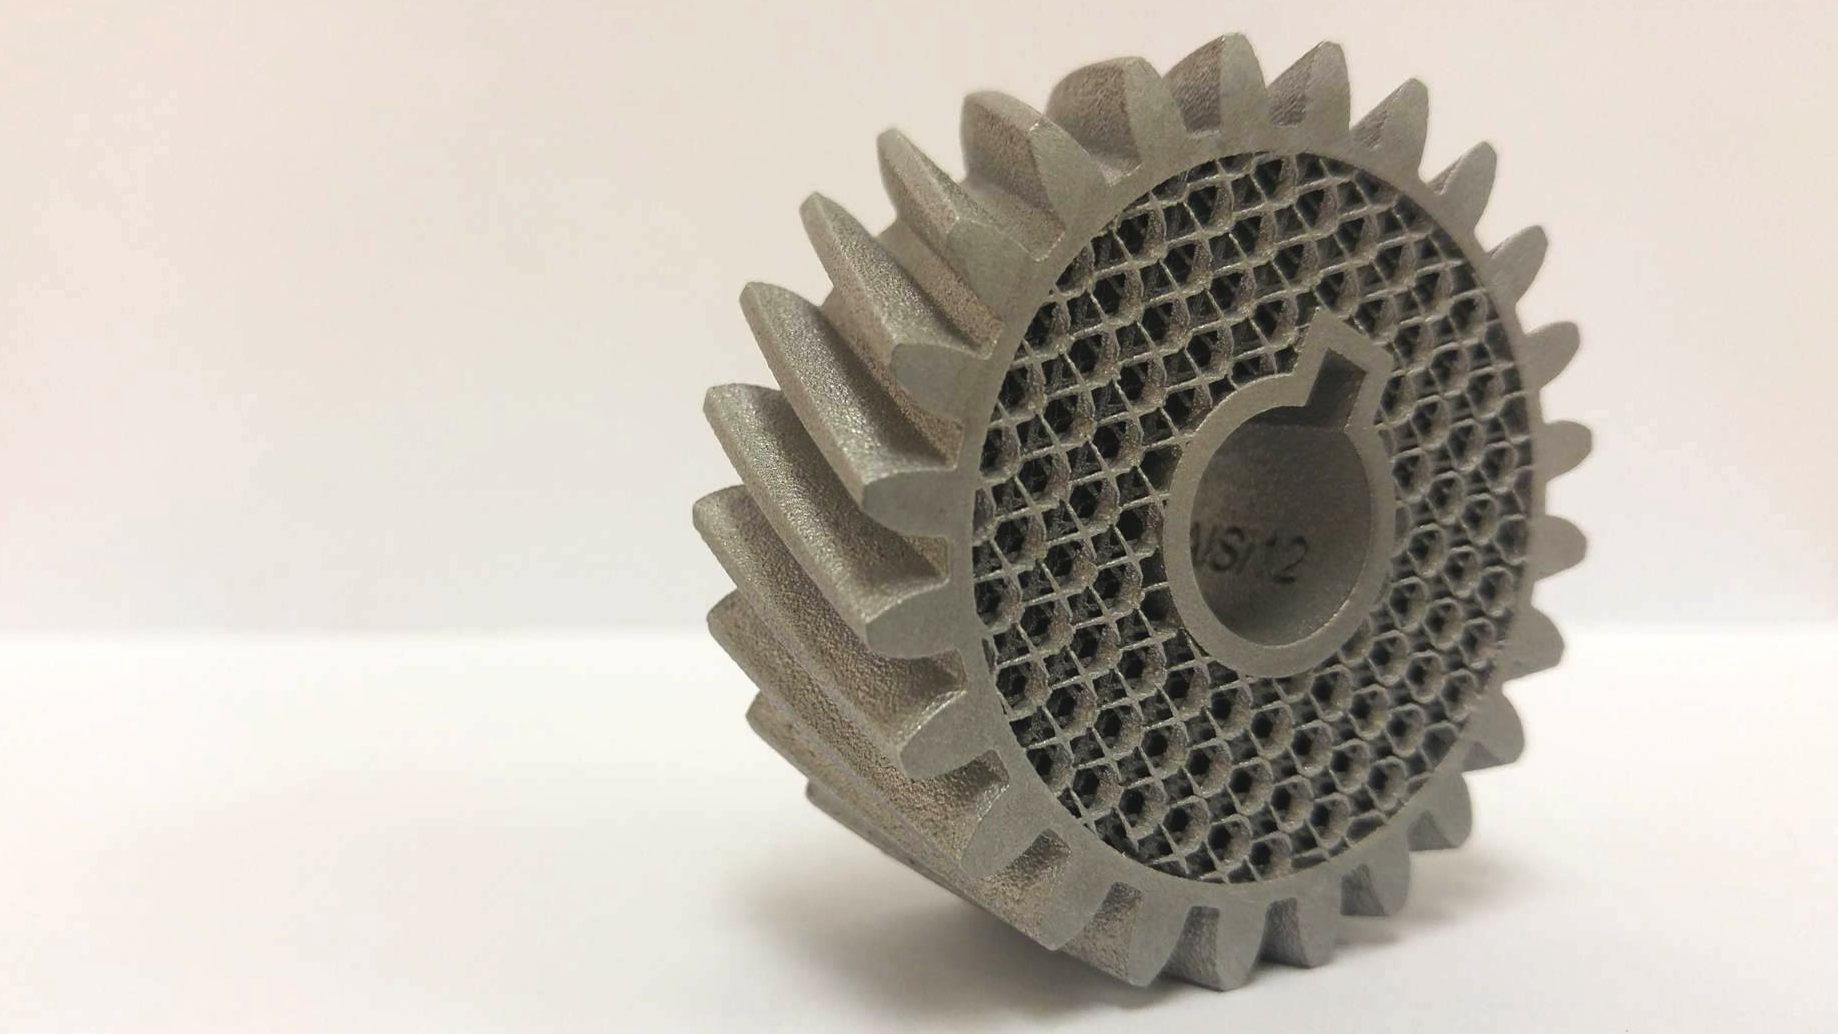 Prototyping picks up speed with metal 3D printing - Cutting Tool Engineering